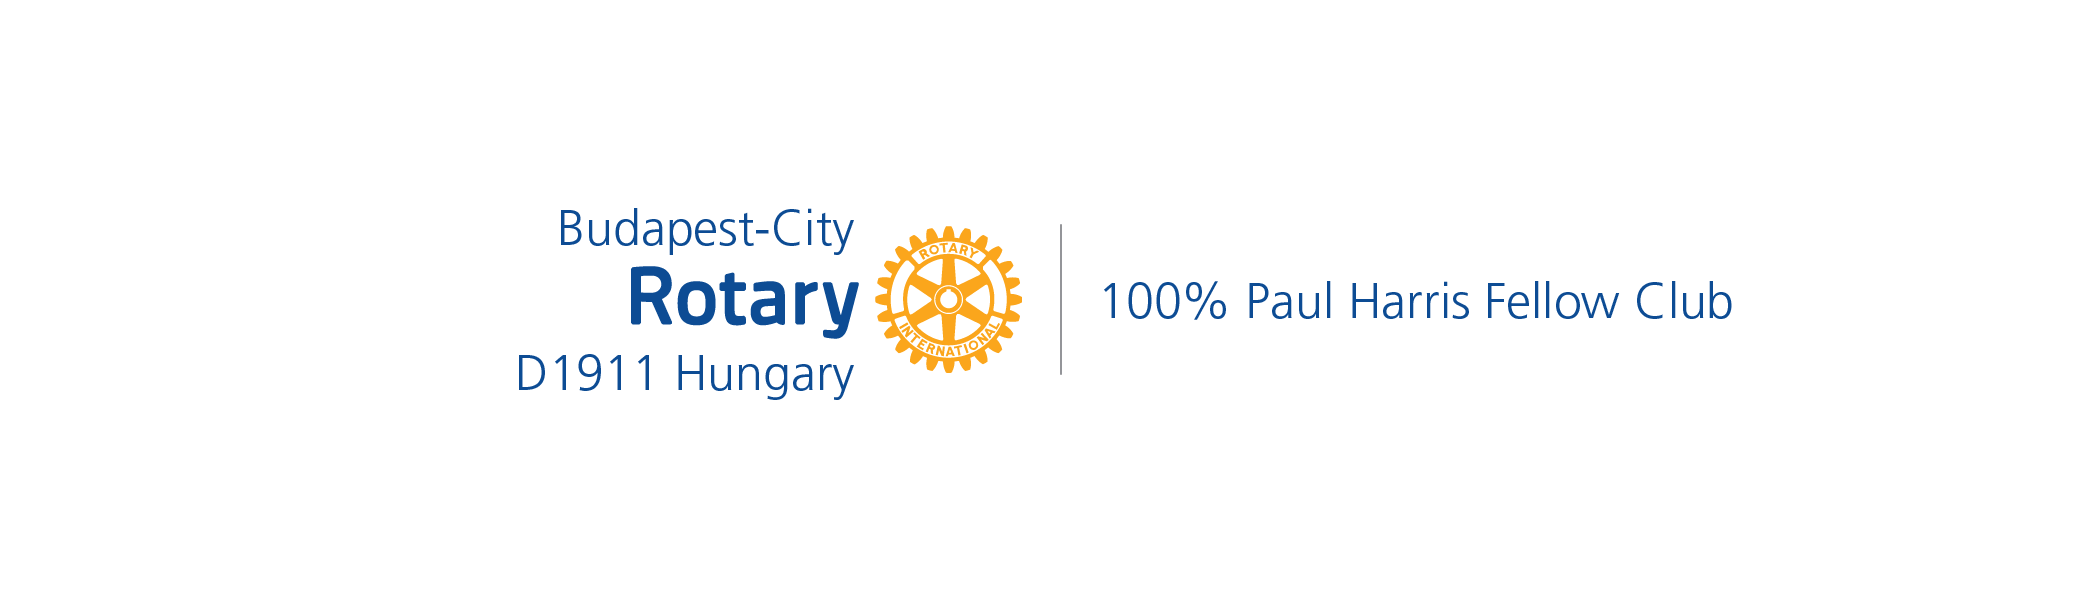 Past Projects — 100% Paul Harris Fellow Rotary Club Budapest-City